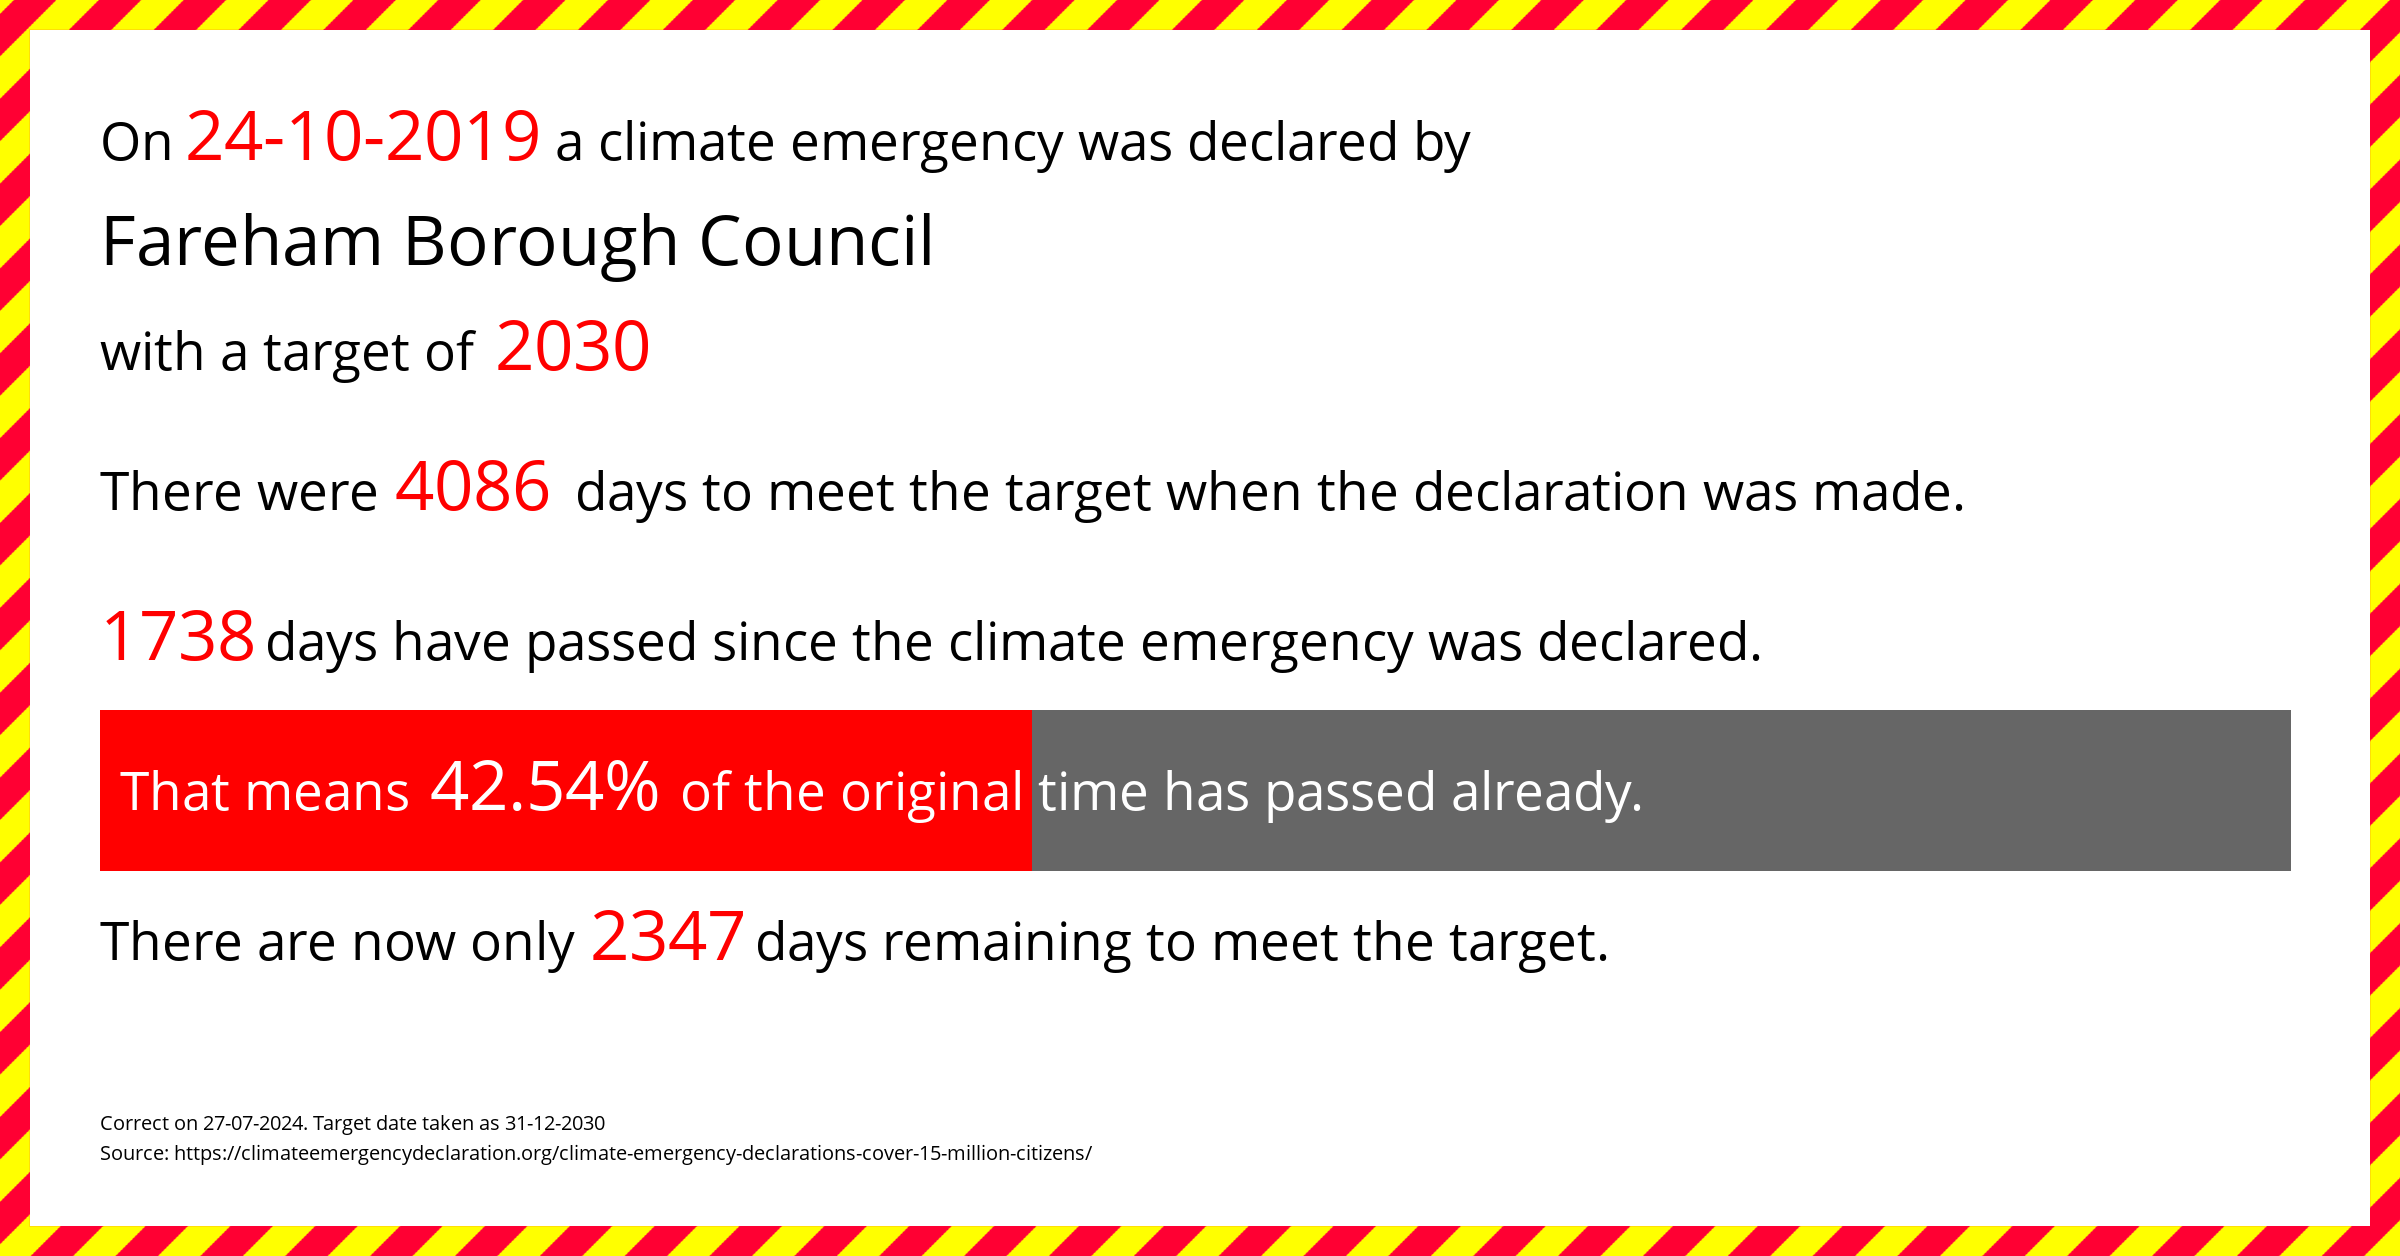 Fareham Borough Council declared a Climate emergency on Thursday 24th October 2019, with a target of 2030.